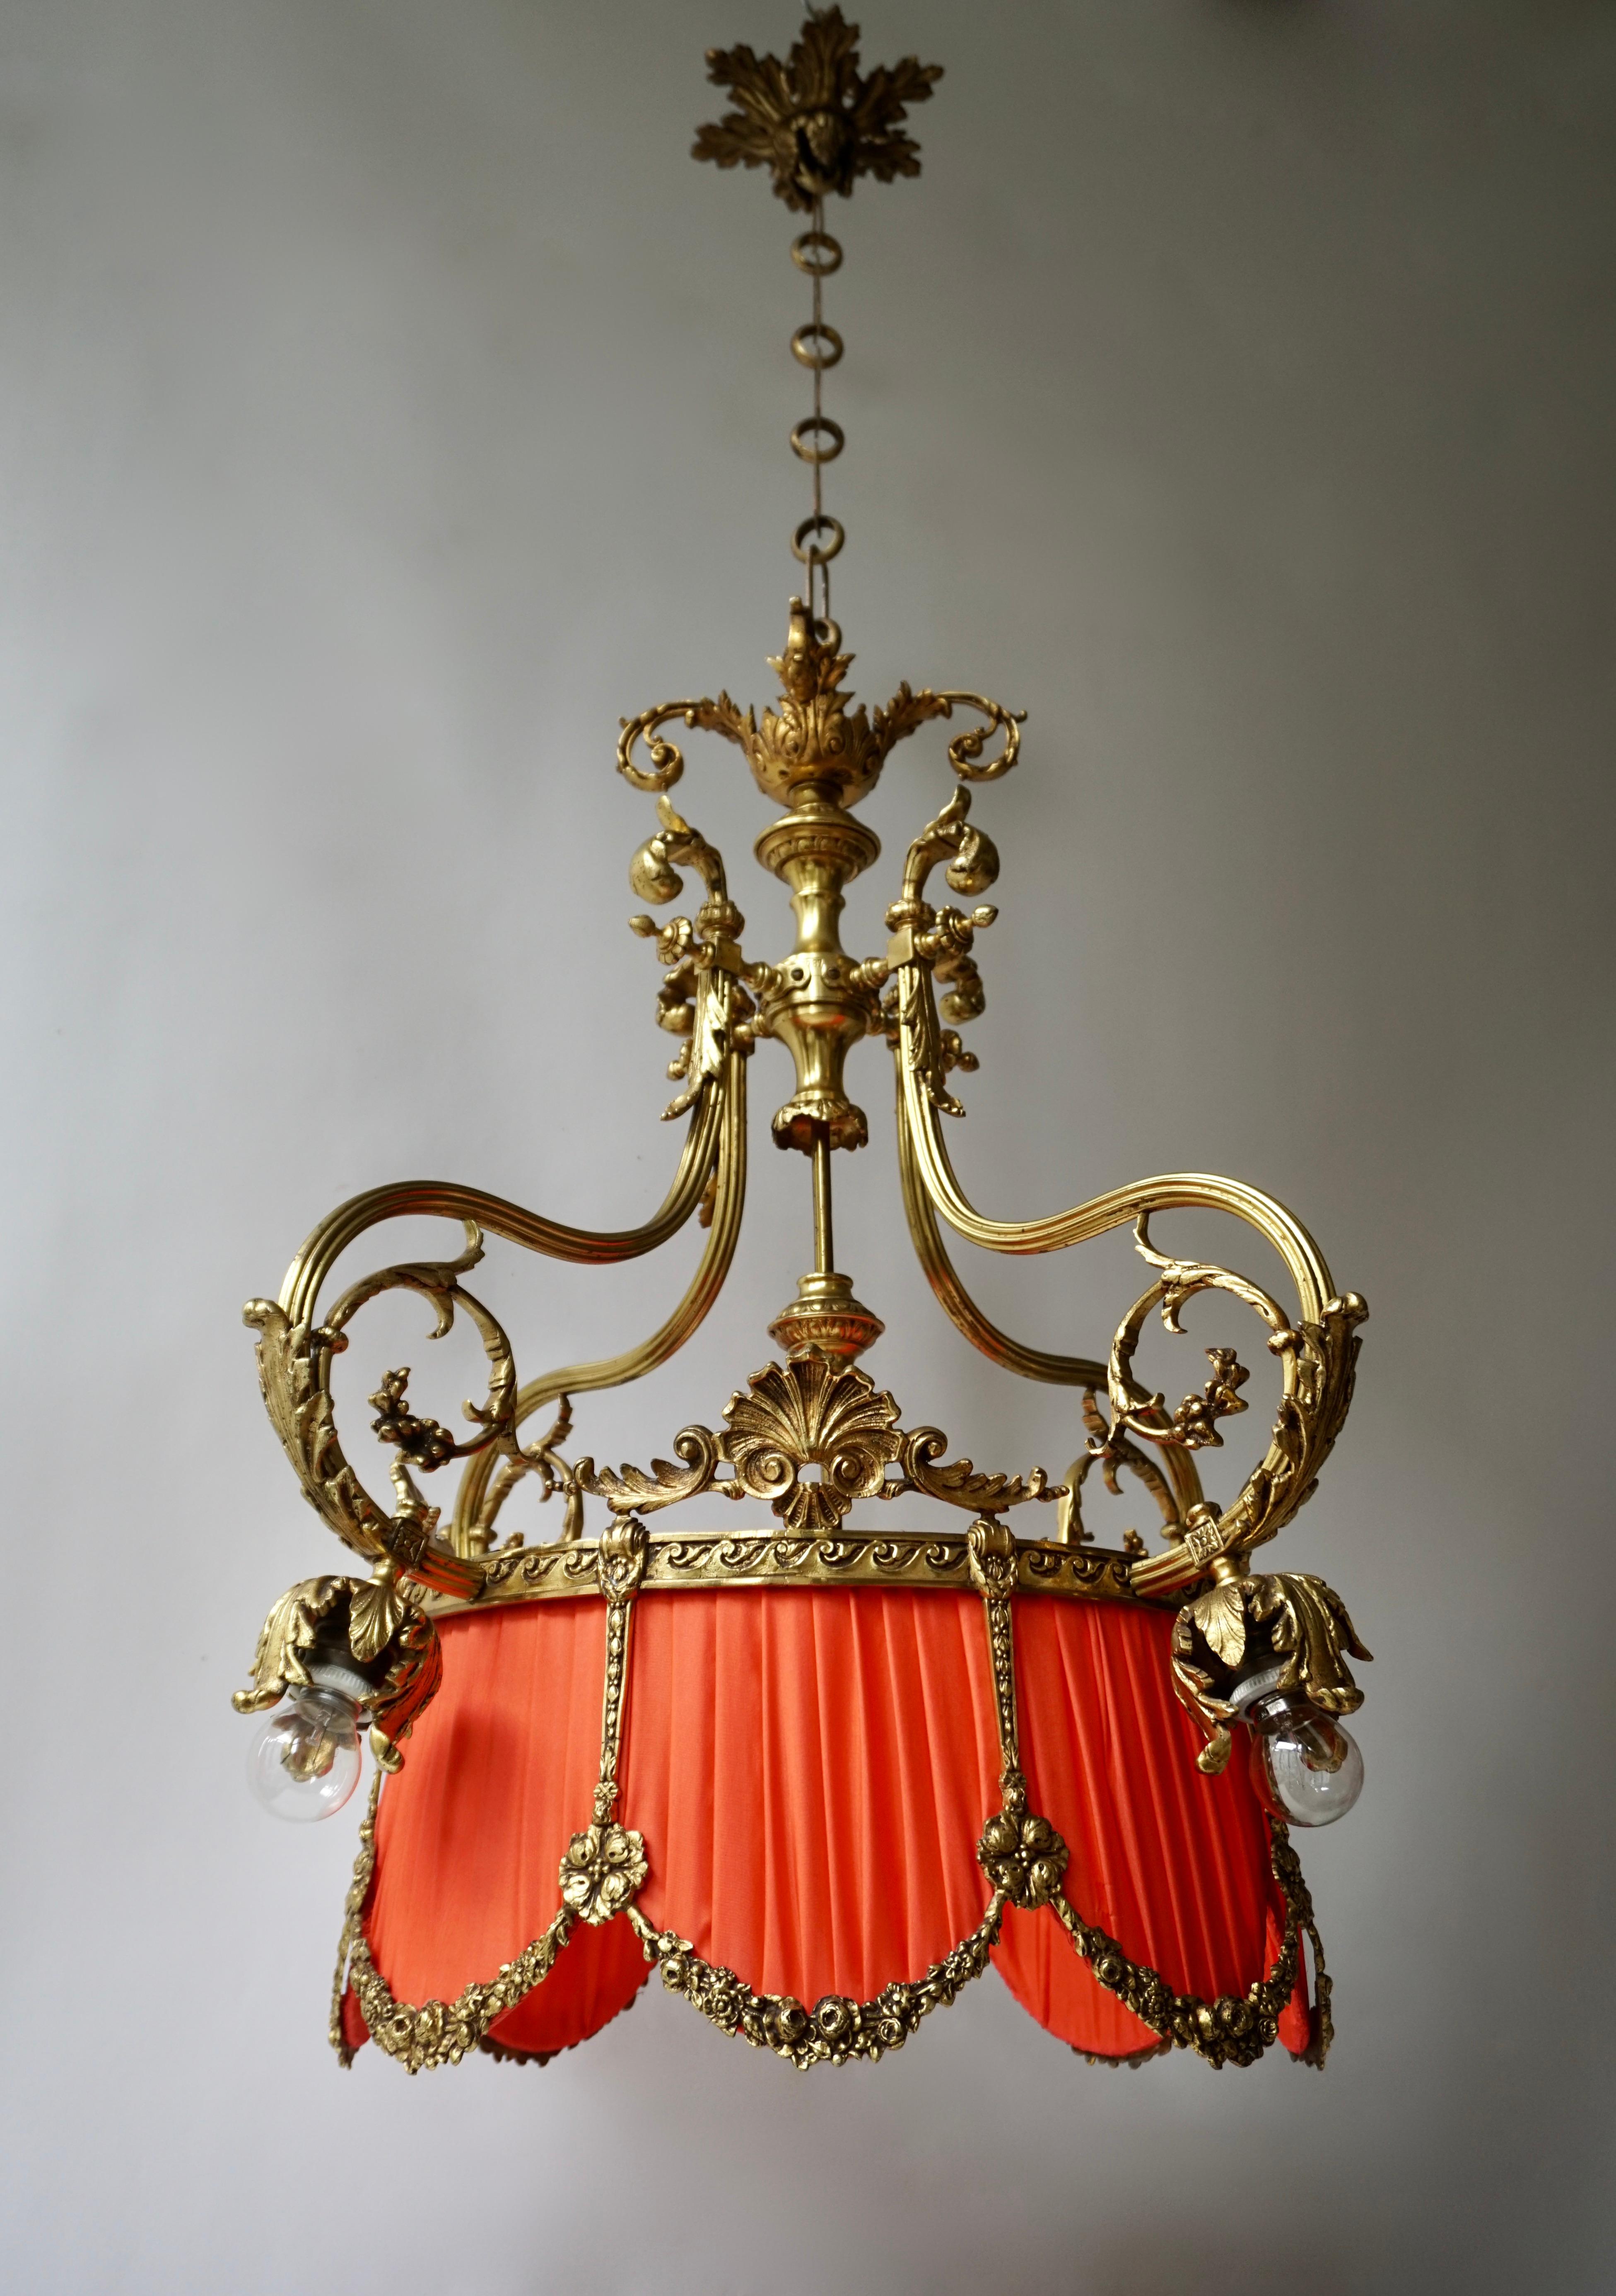 A French midcentury crown-shaped bronze five-light chandelier.
This elegant French chandelier from the beginning of the 20th century features an open circular base, which resembles that of a crown, has been elaborately stylized with guirlandes,